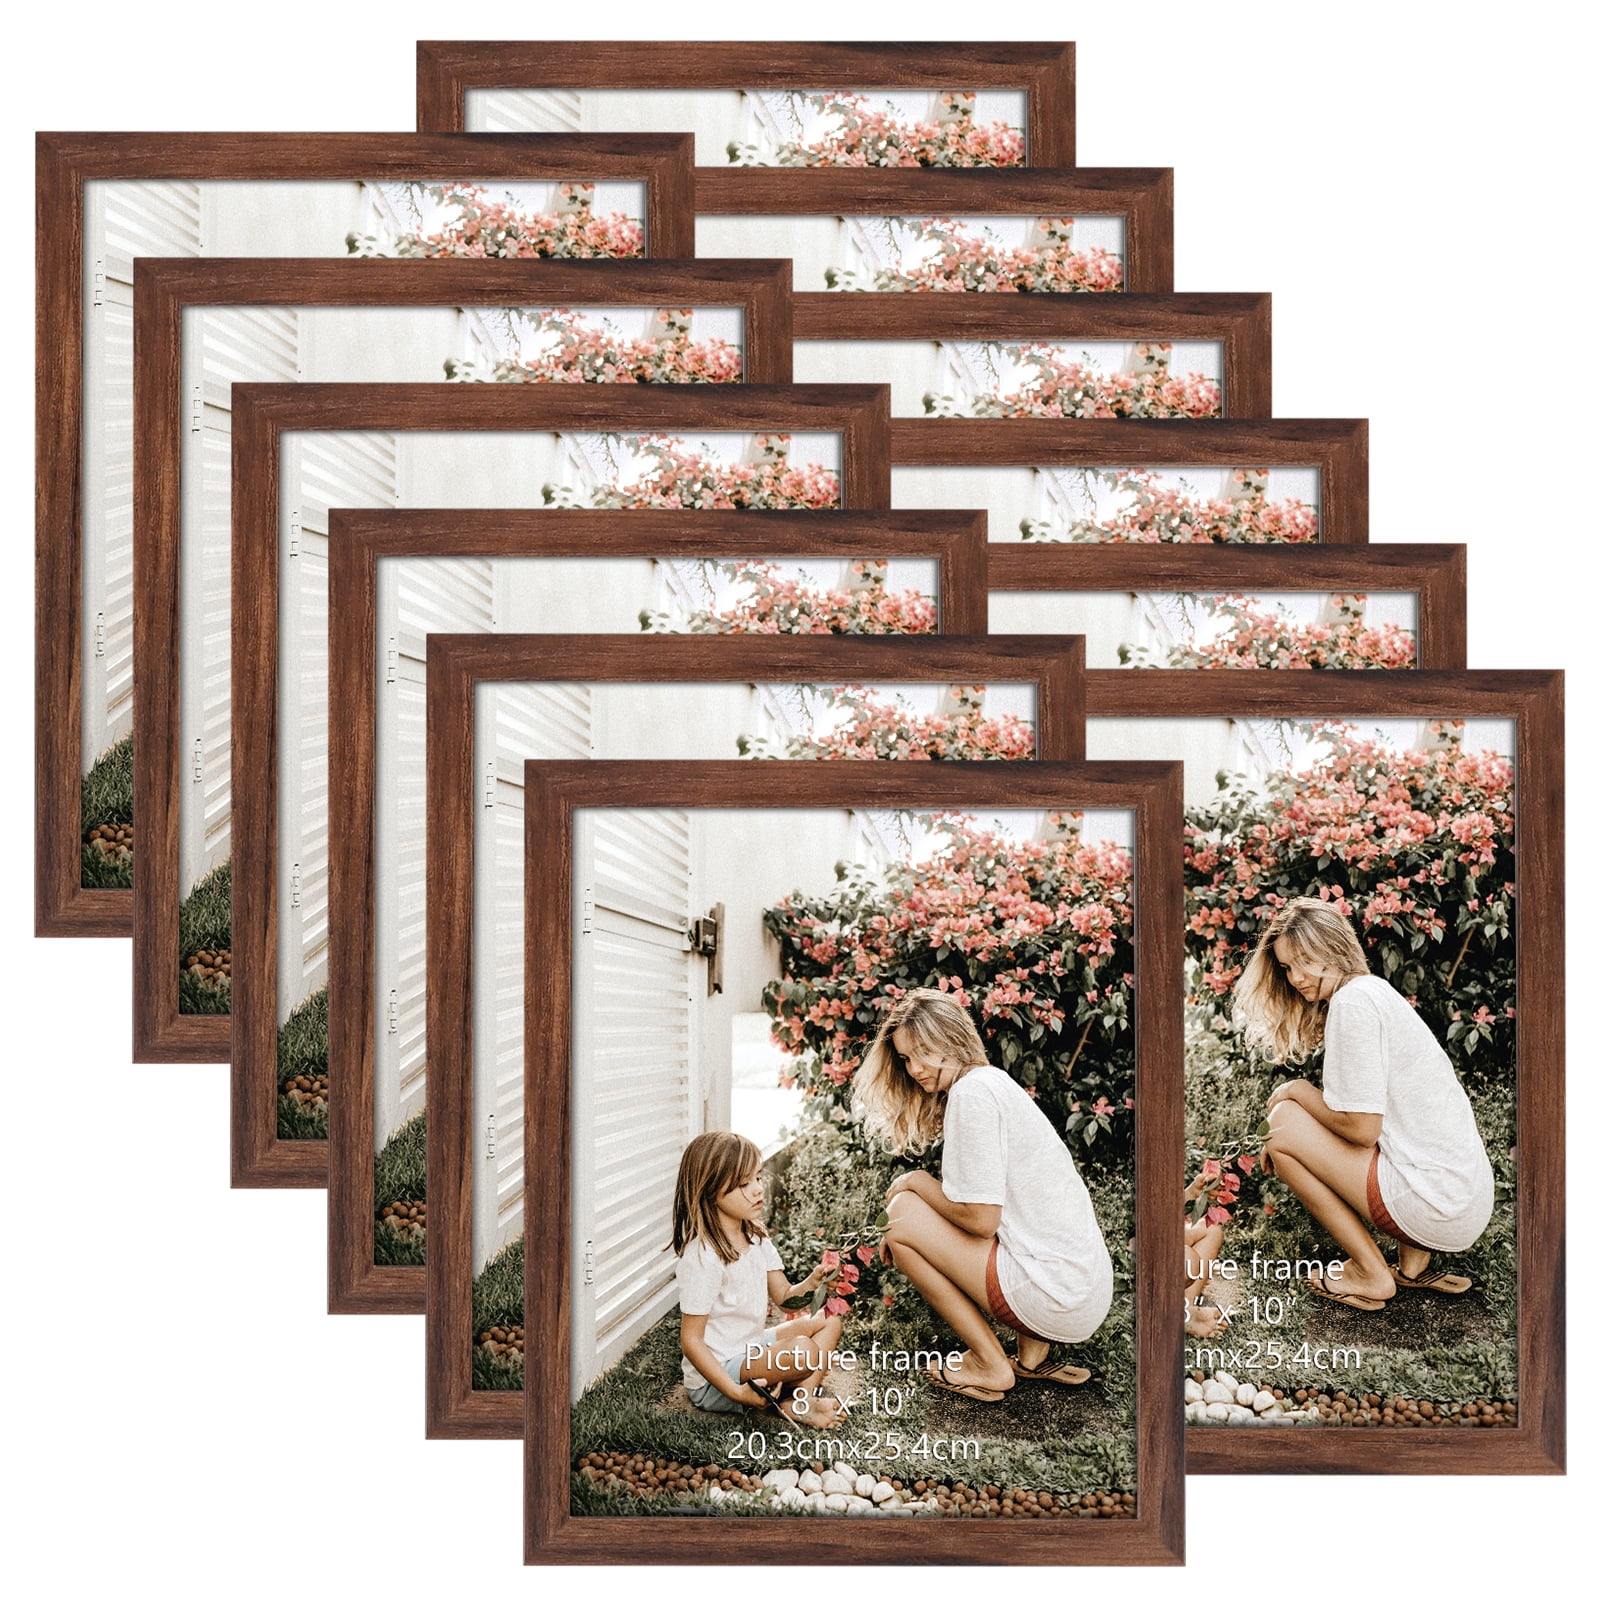 HAMITOR Picture Frames Set Wall Gallery: 10 PCS Family Photo Frames Set for  Wall or Tabletop Decor Including Two 8×10 Four 5×7 Four 4×6 - Rustic Brown